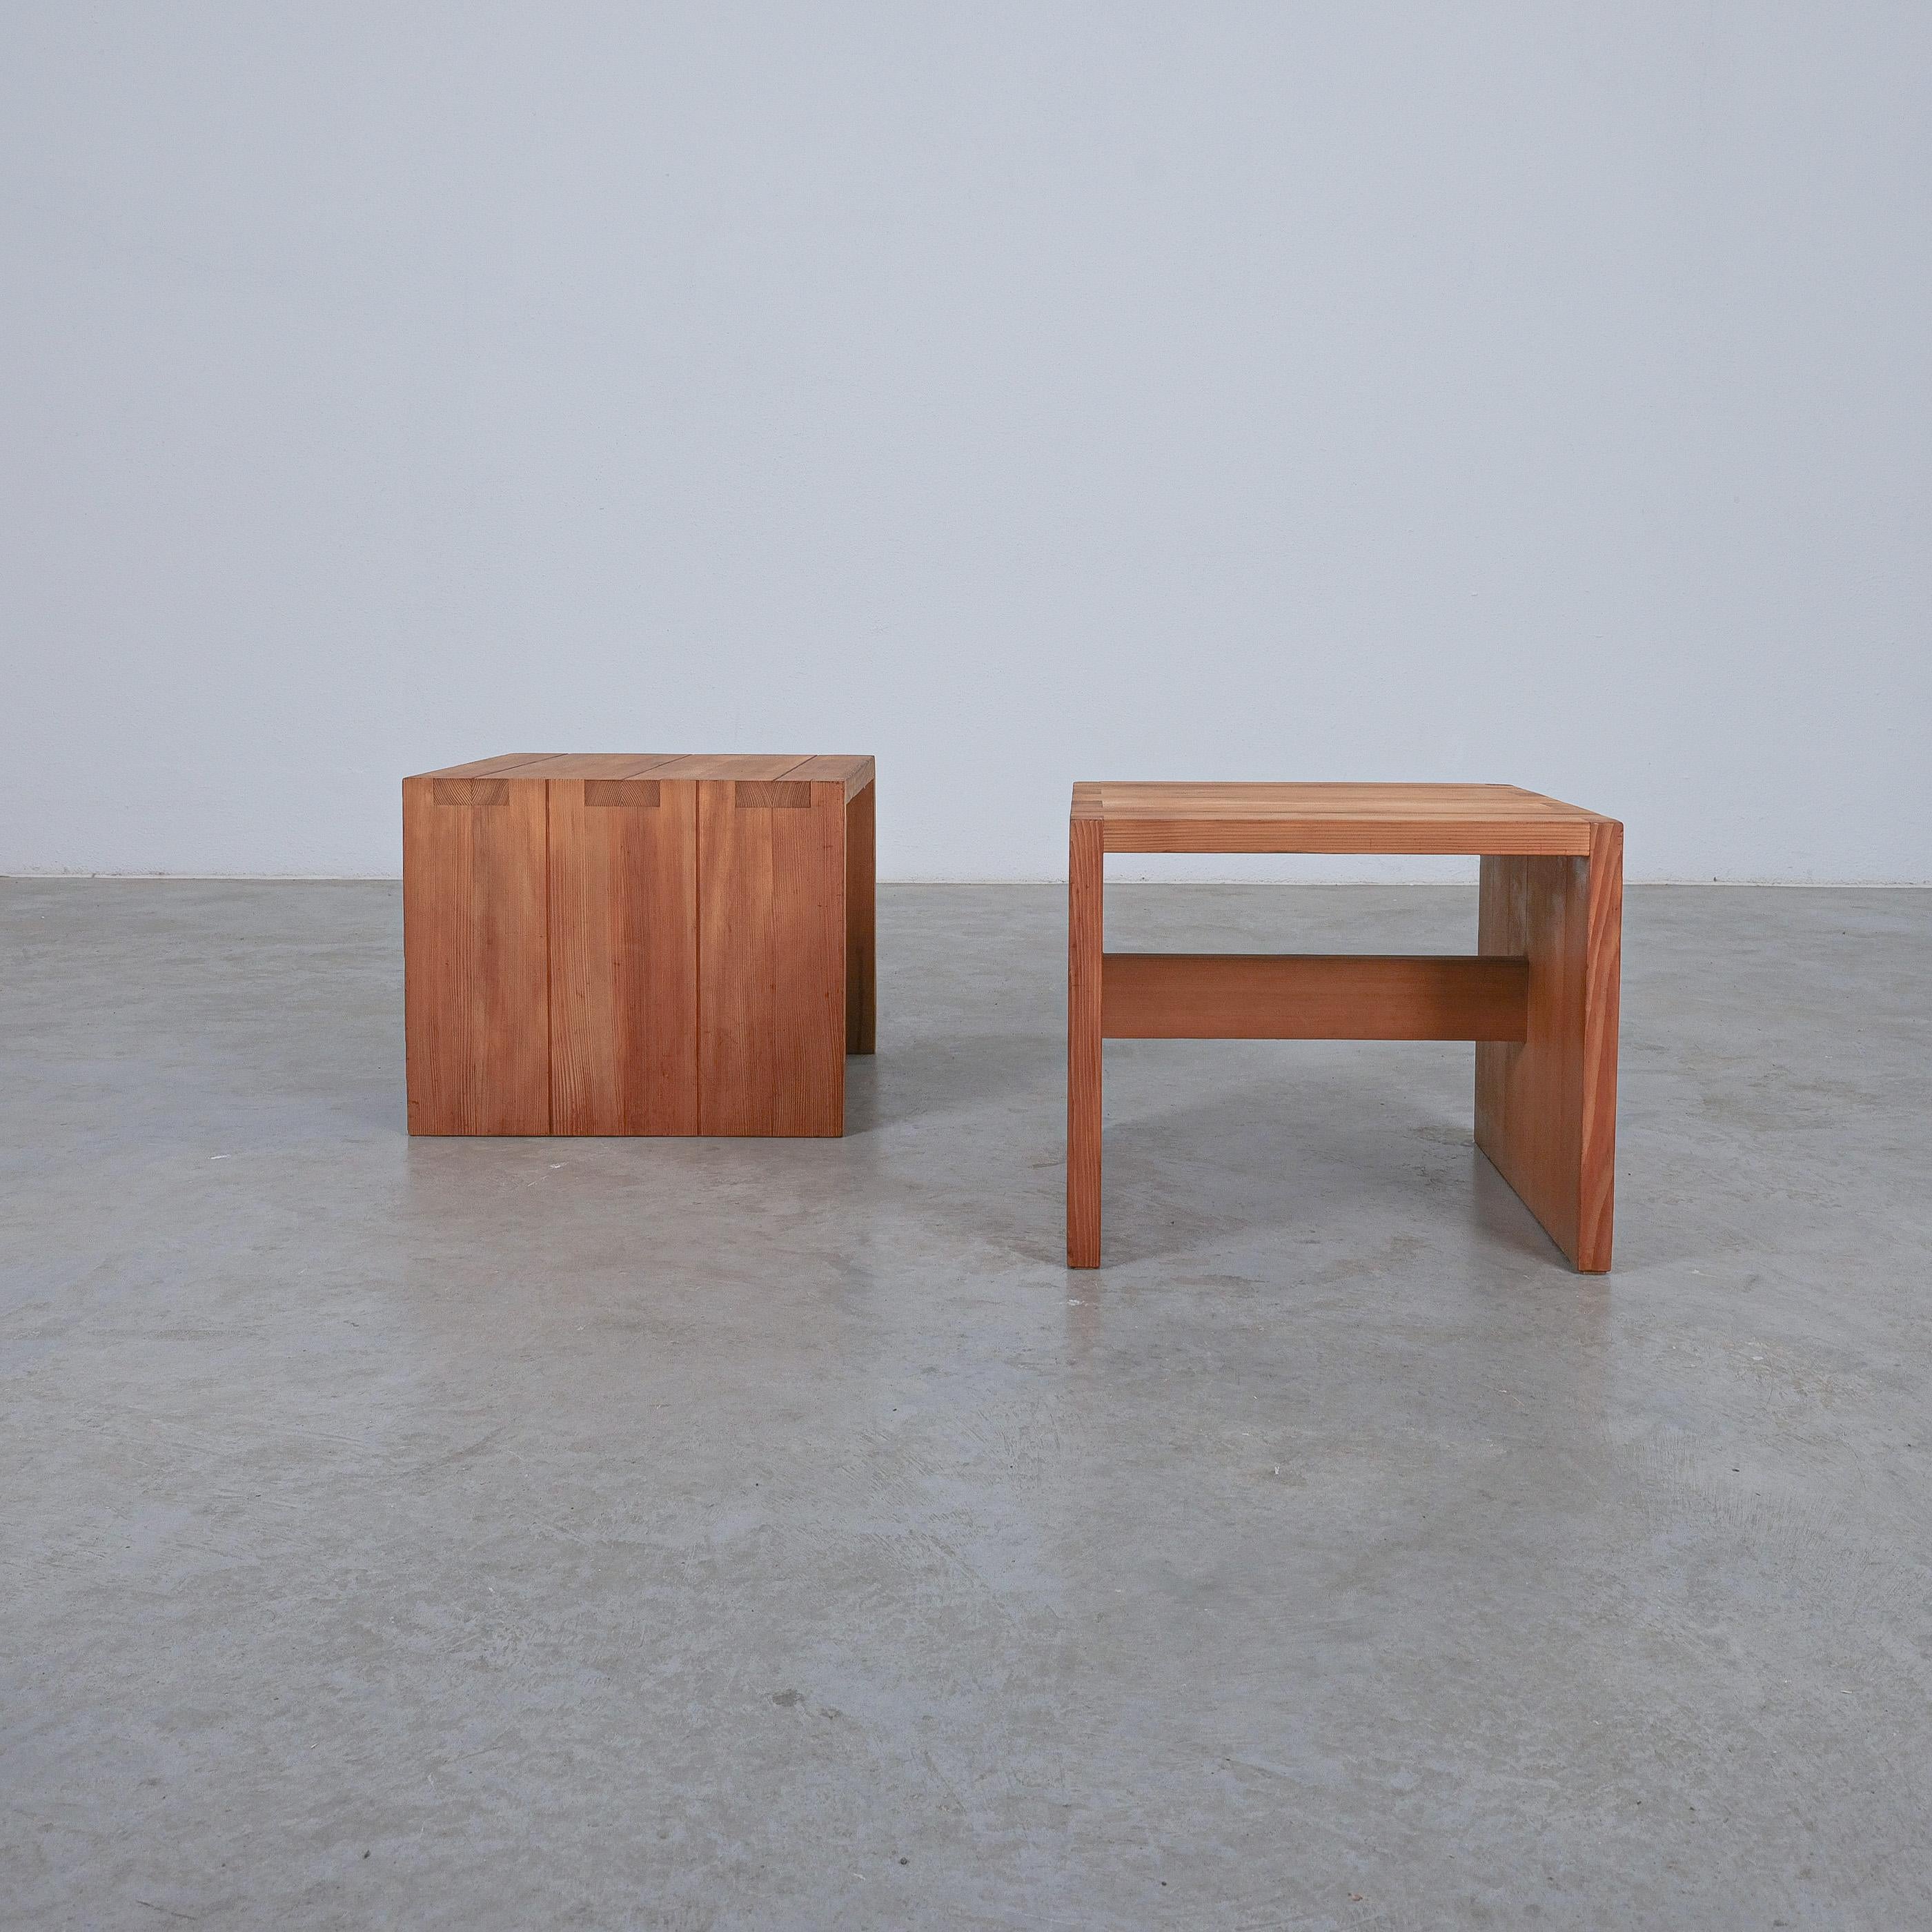 Pair of Pine Wood Side Tables Style of Charlotte Perriand, 1960 For Sale 1